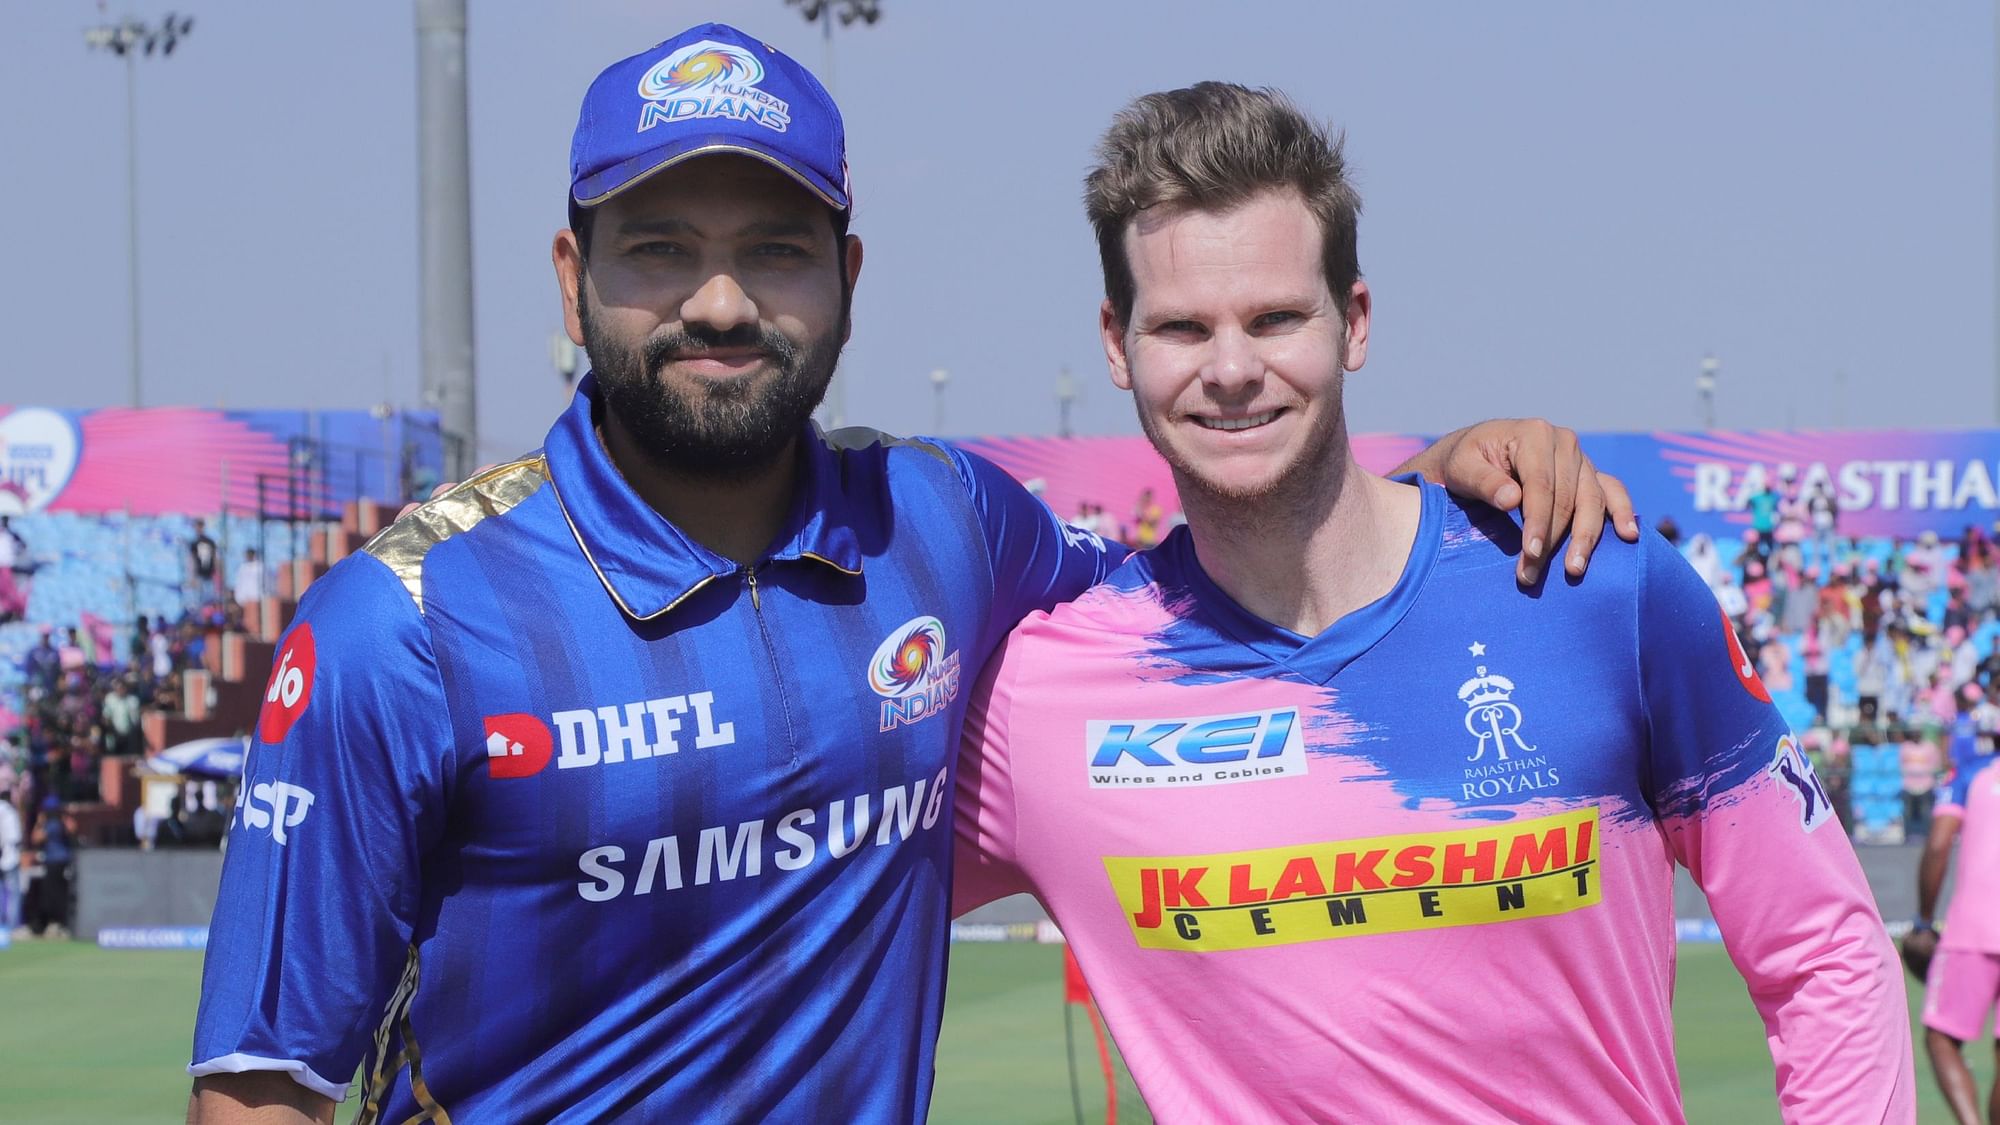 Steve Smith has replaced Ajinkya Rahane as the skipper of the Royals for the rest of the season.&nbsp;